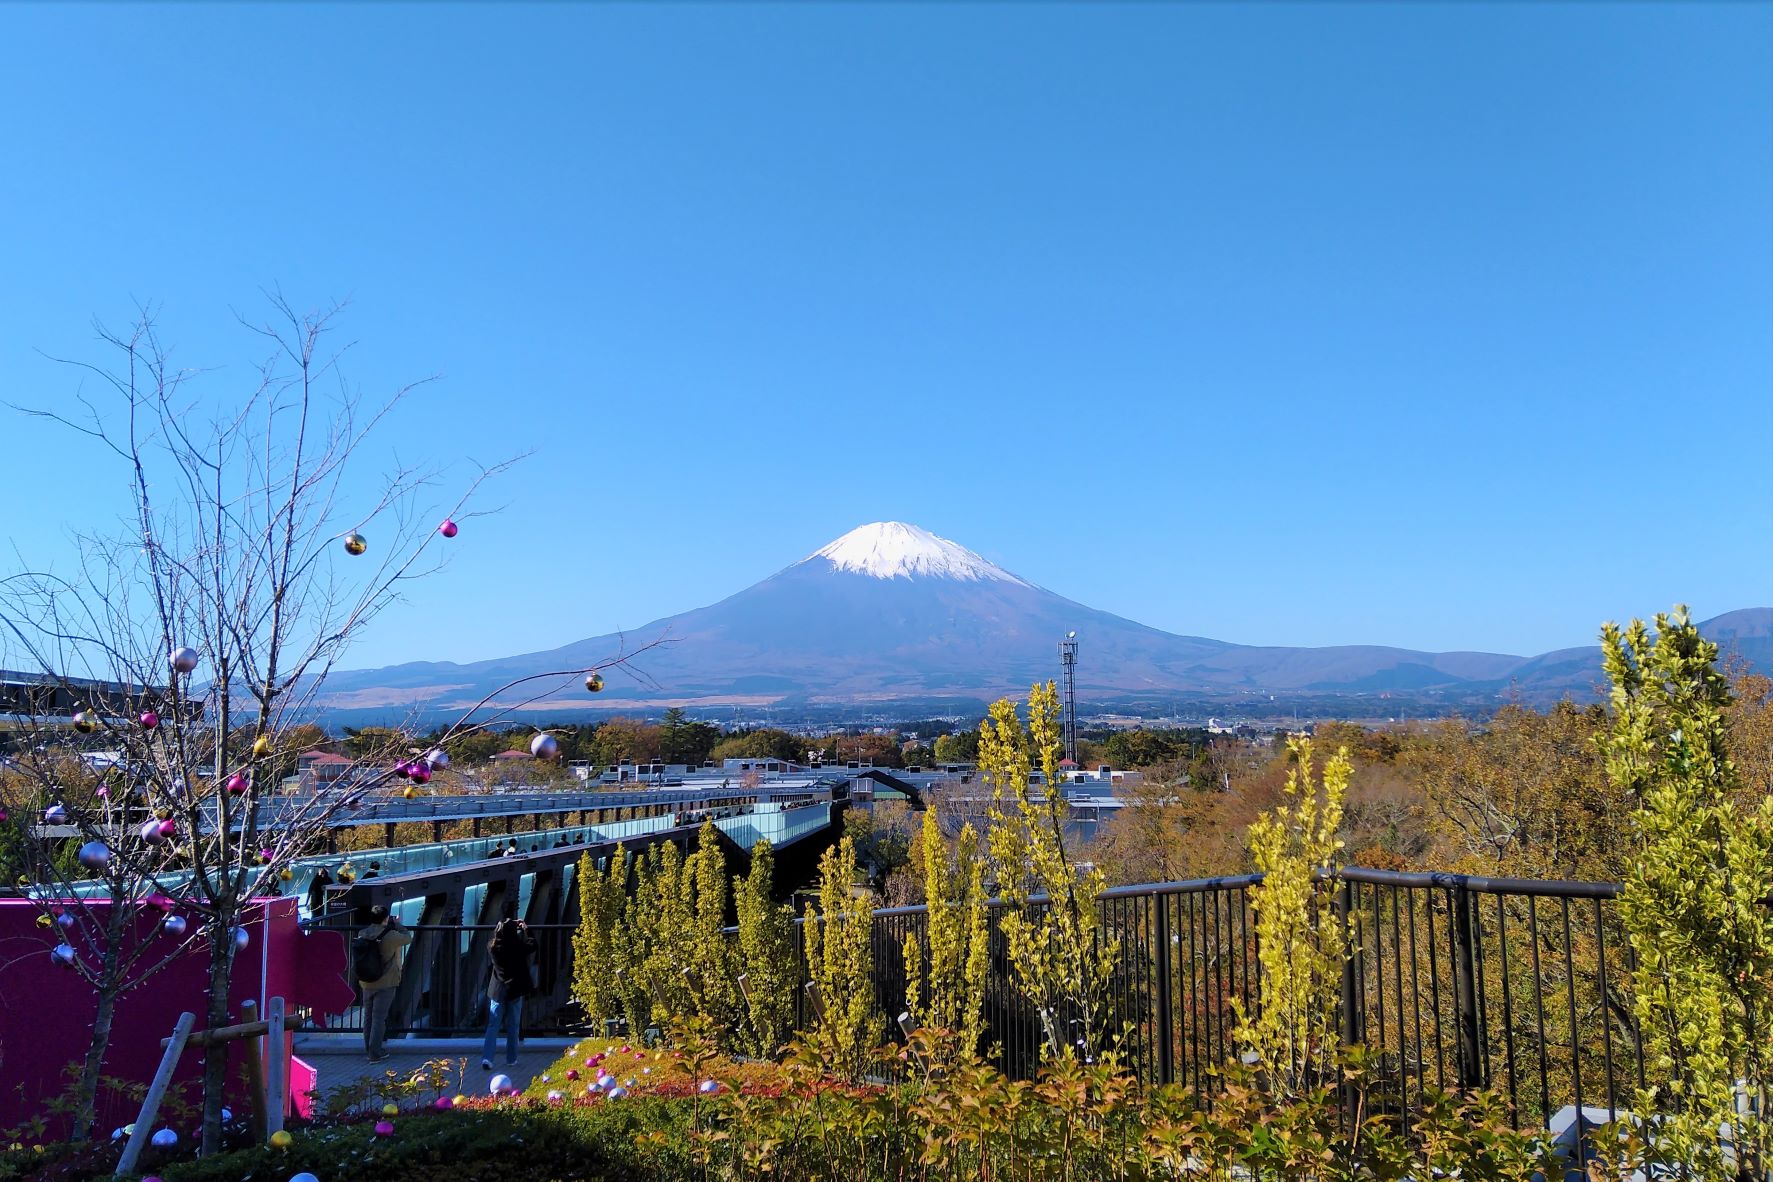 This is Mt. Fuji in Japan